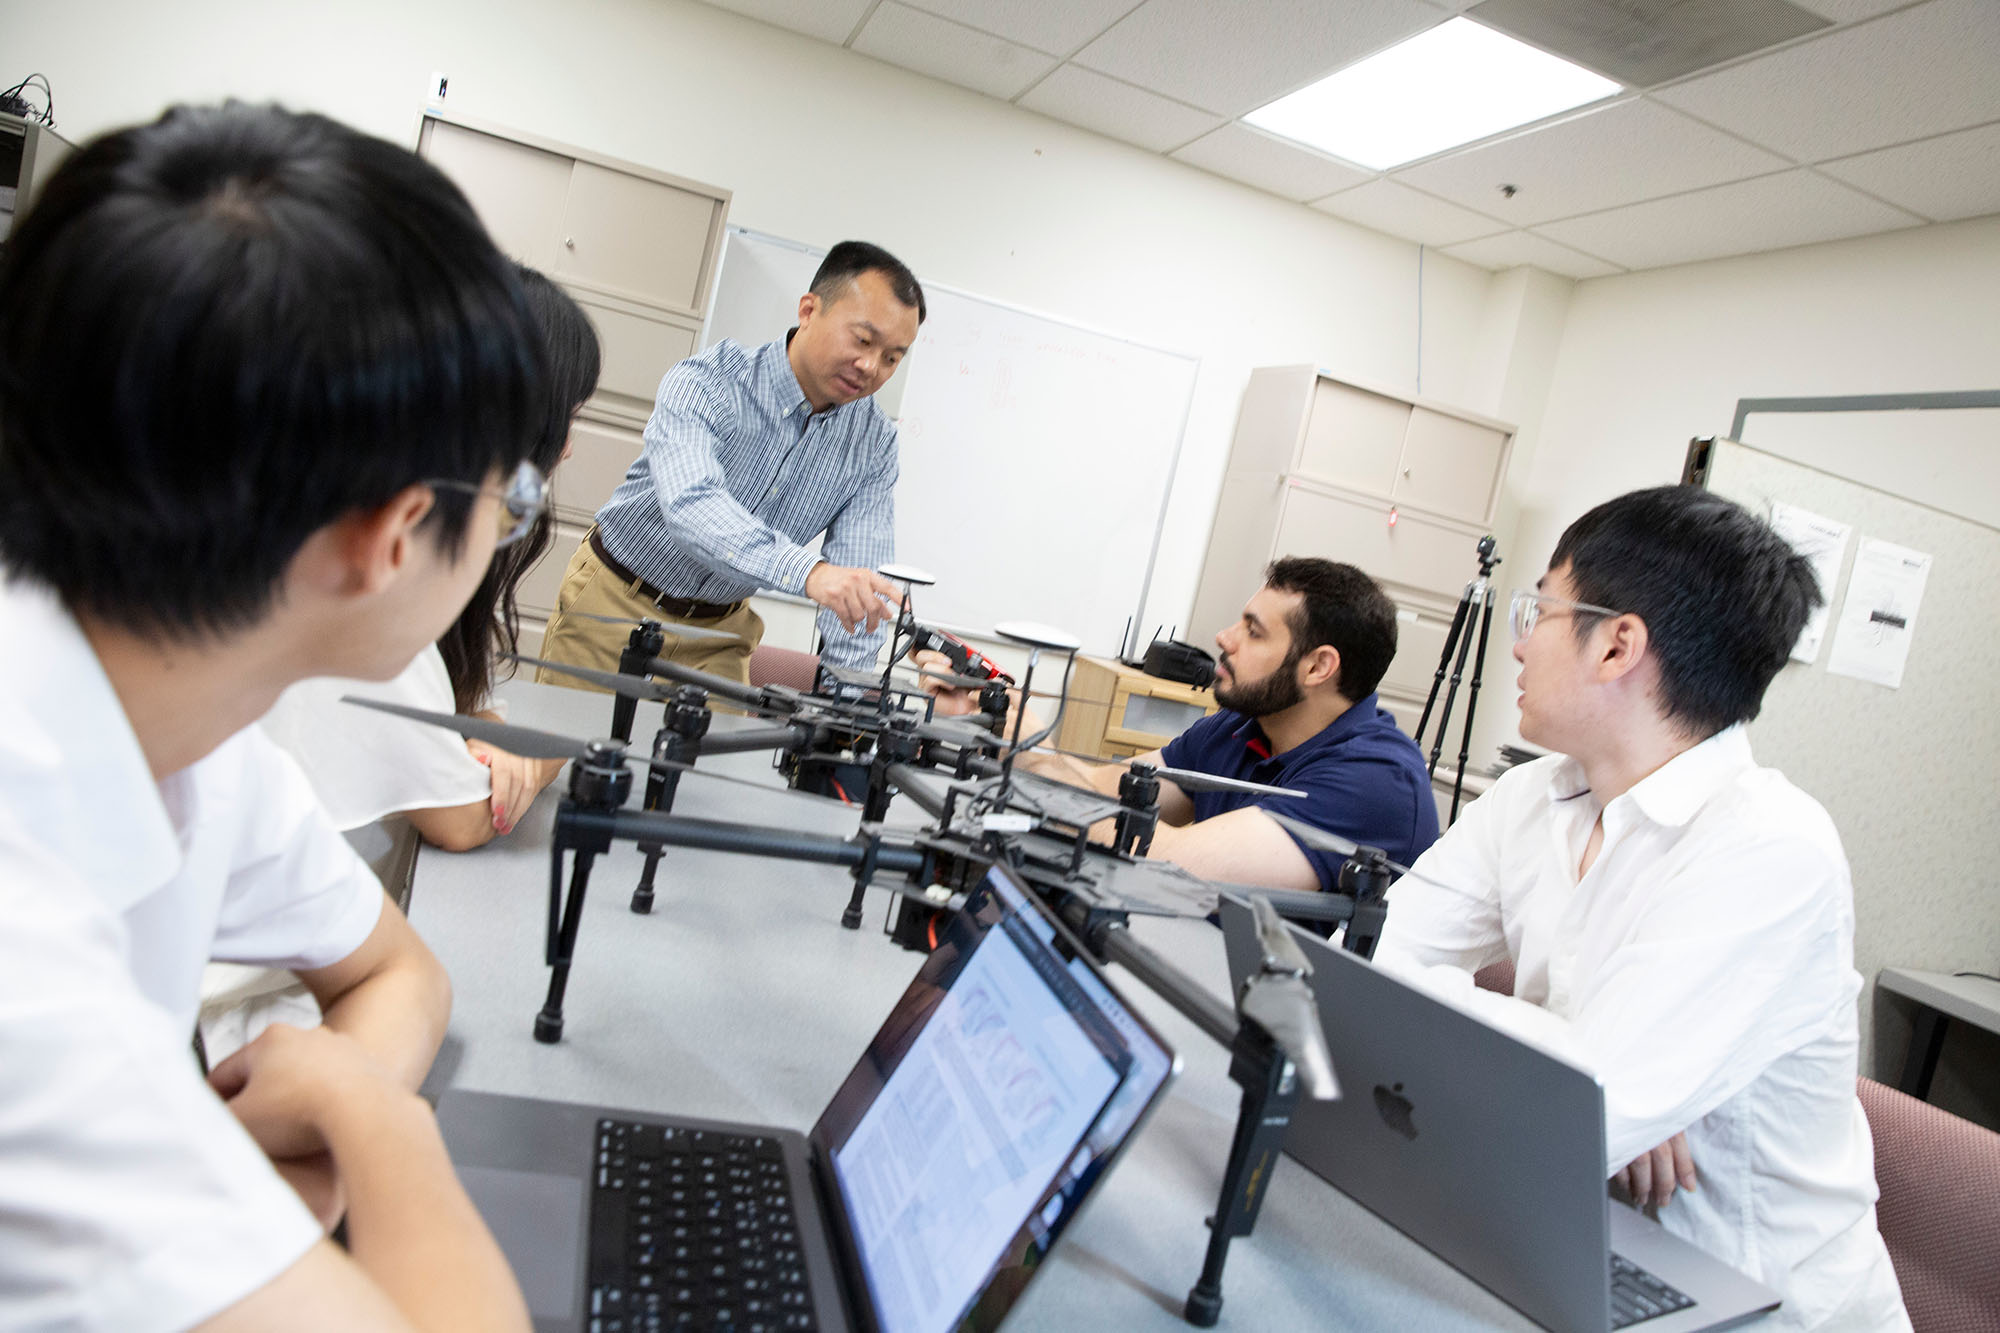 A professor talks to a group of students assembled around a large rectangle table with drones on the table.